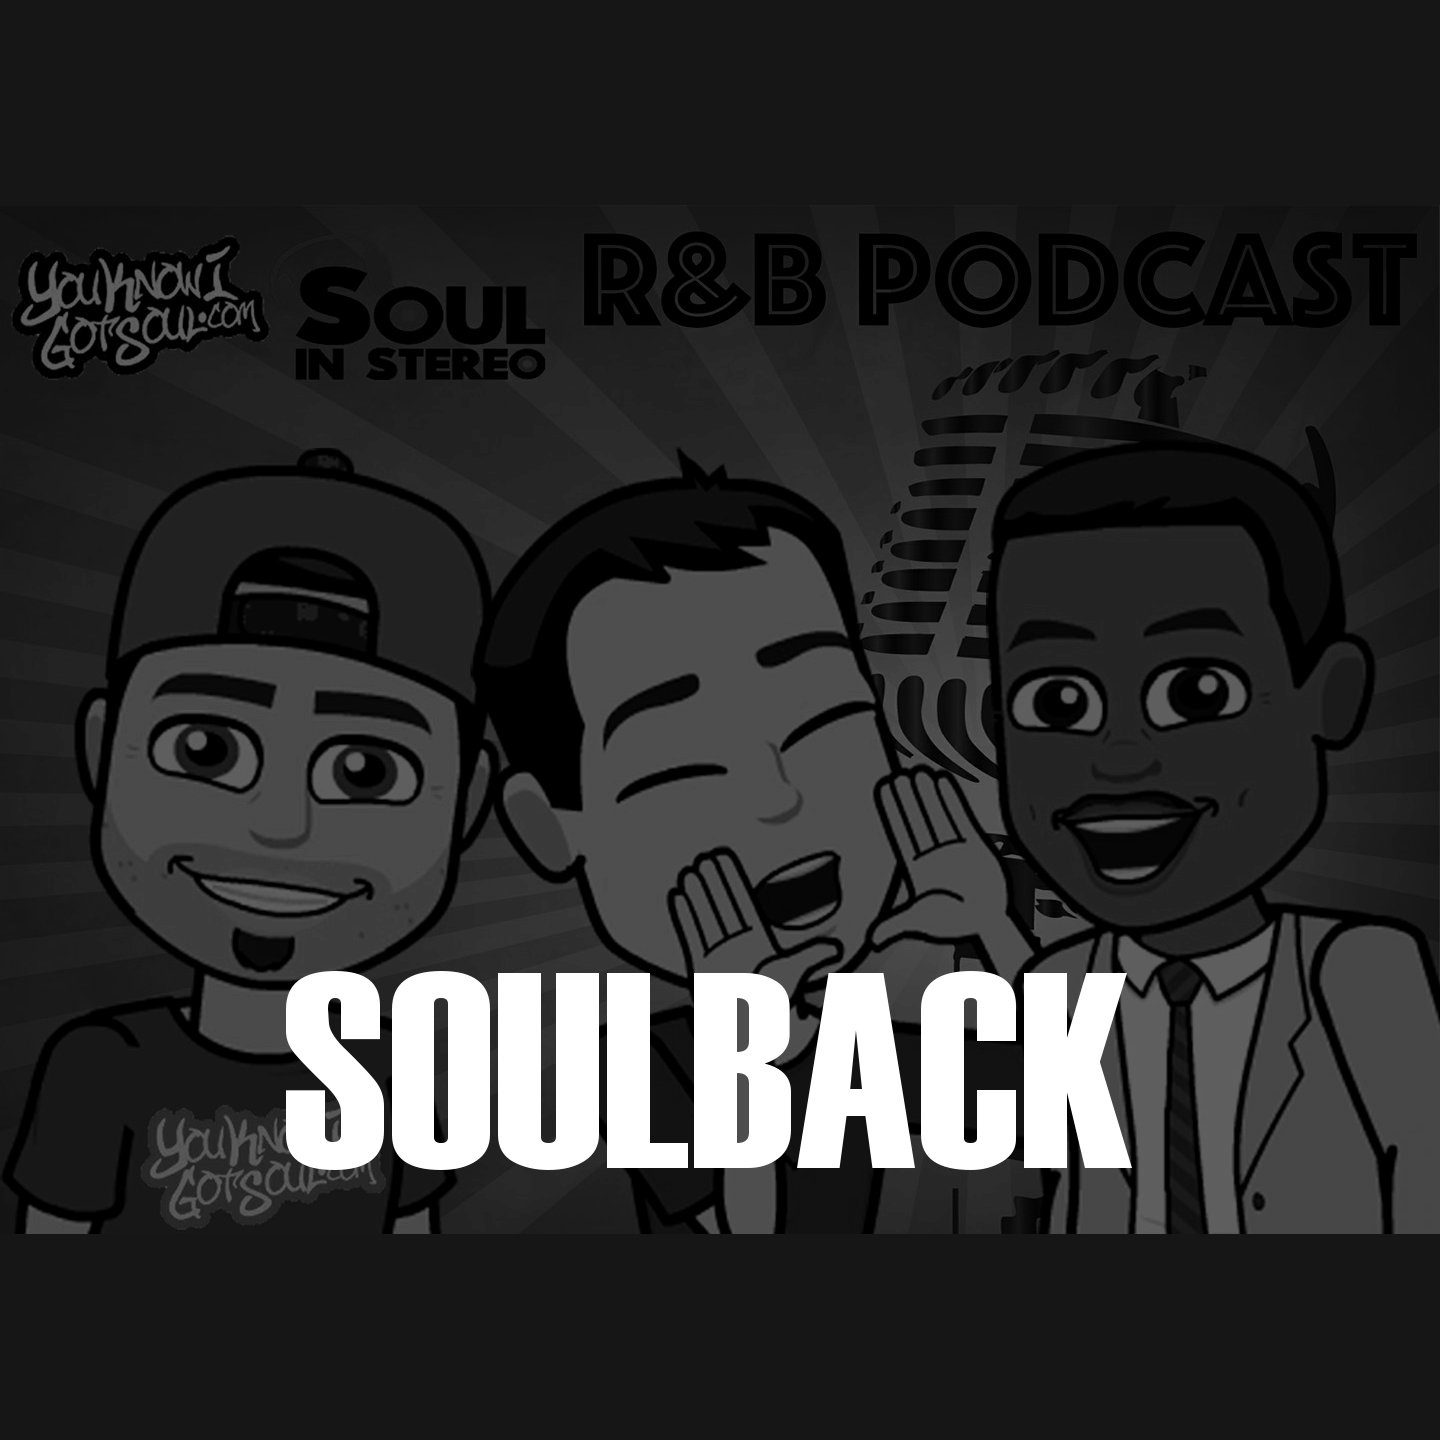 SoulBack (featuring Nokio of Dru Hill) – The R&B Podcast Episode 5